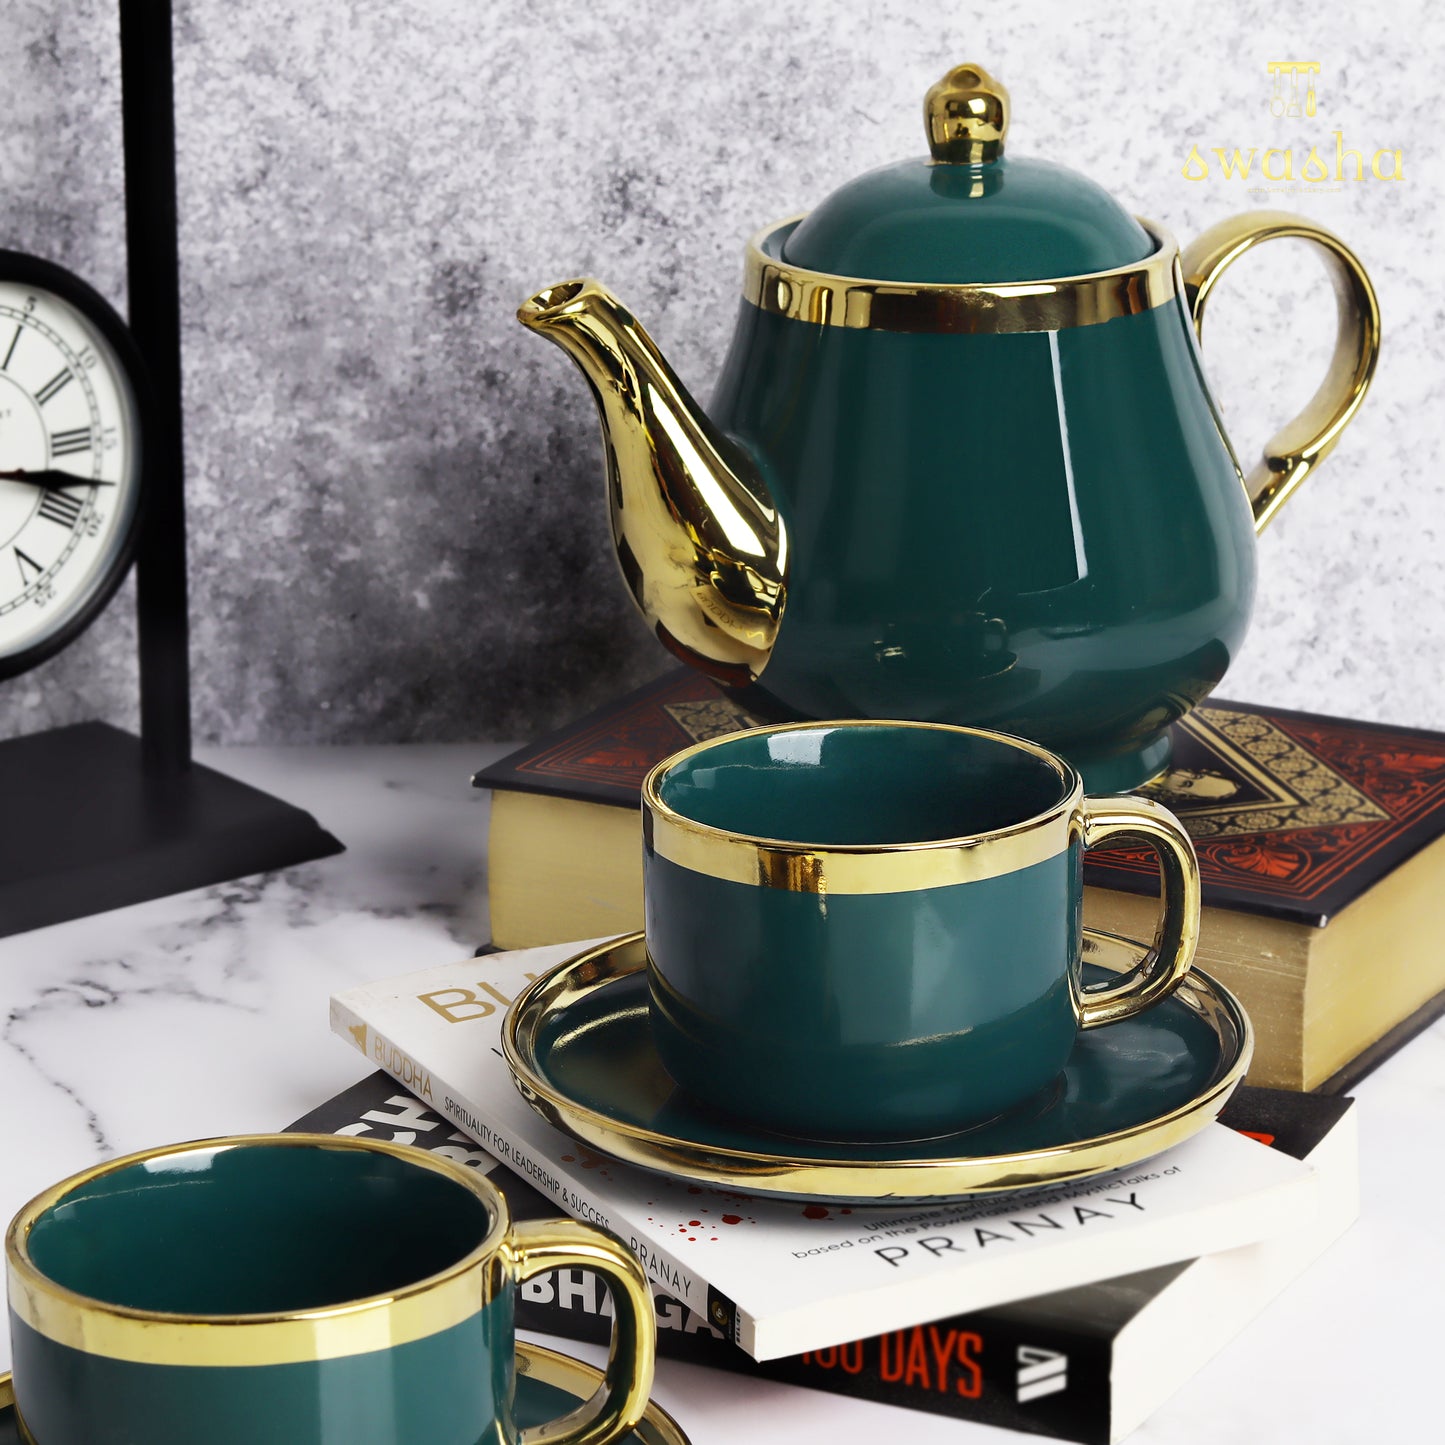 Swasha Home Decor - Ceramic Cups, Saucers, and Kettle Set: Elegance Meets Functionality